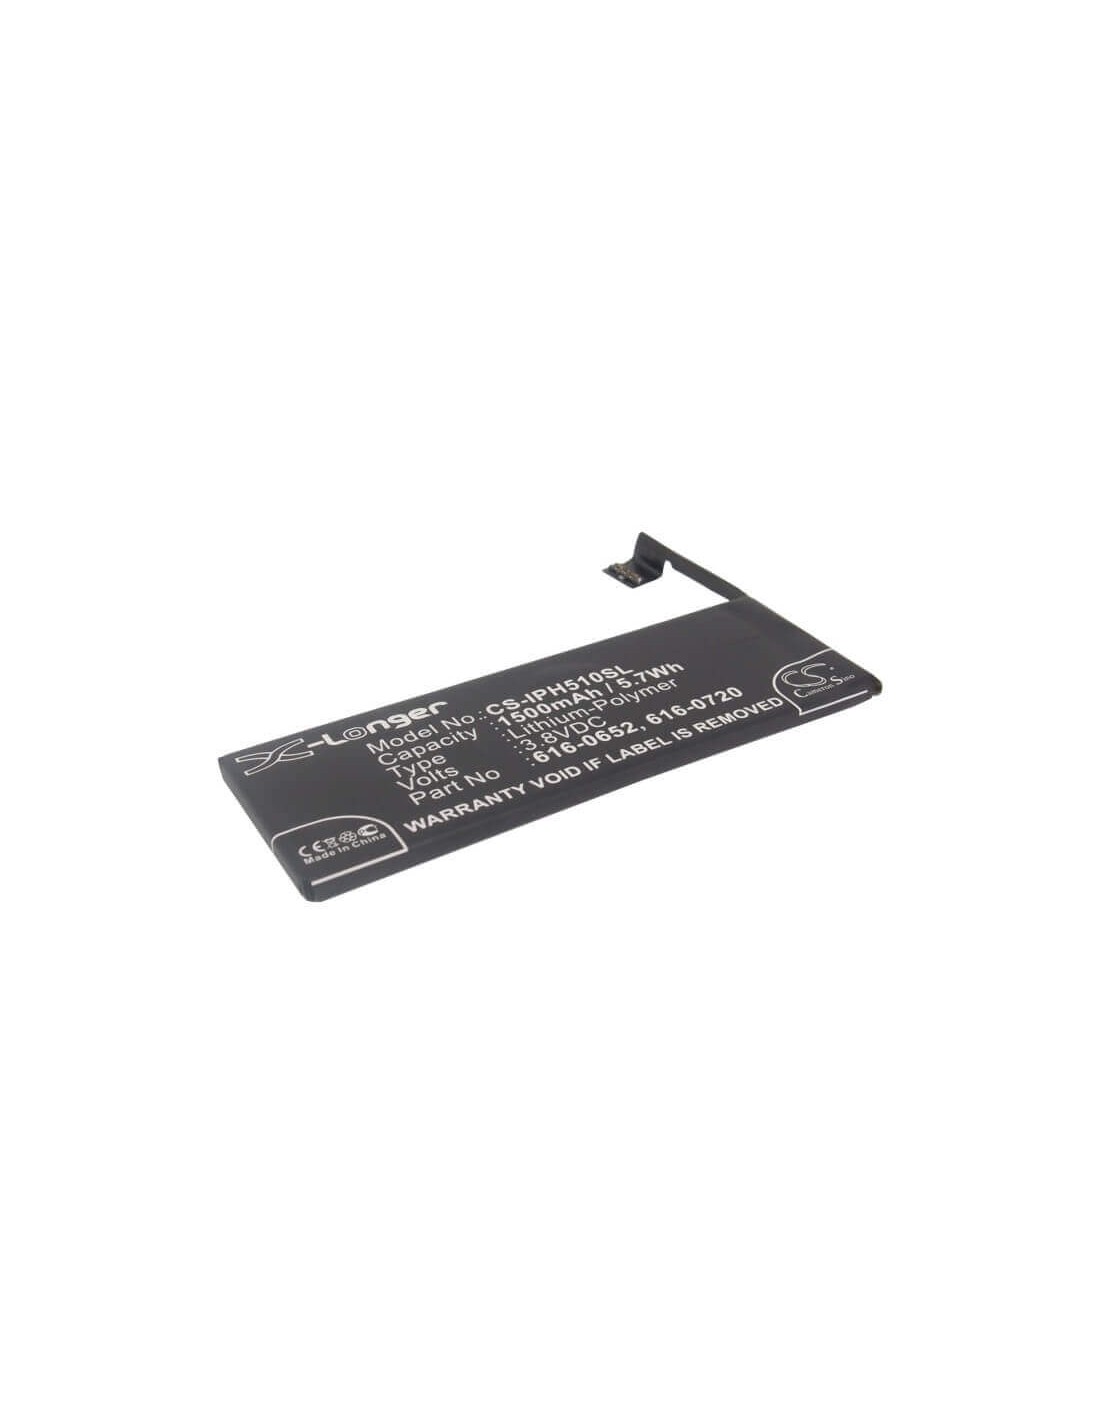 Battery for Apple iPhone 5s, A1234, A1528 3.8V, 1500mAh - 5.70Wh